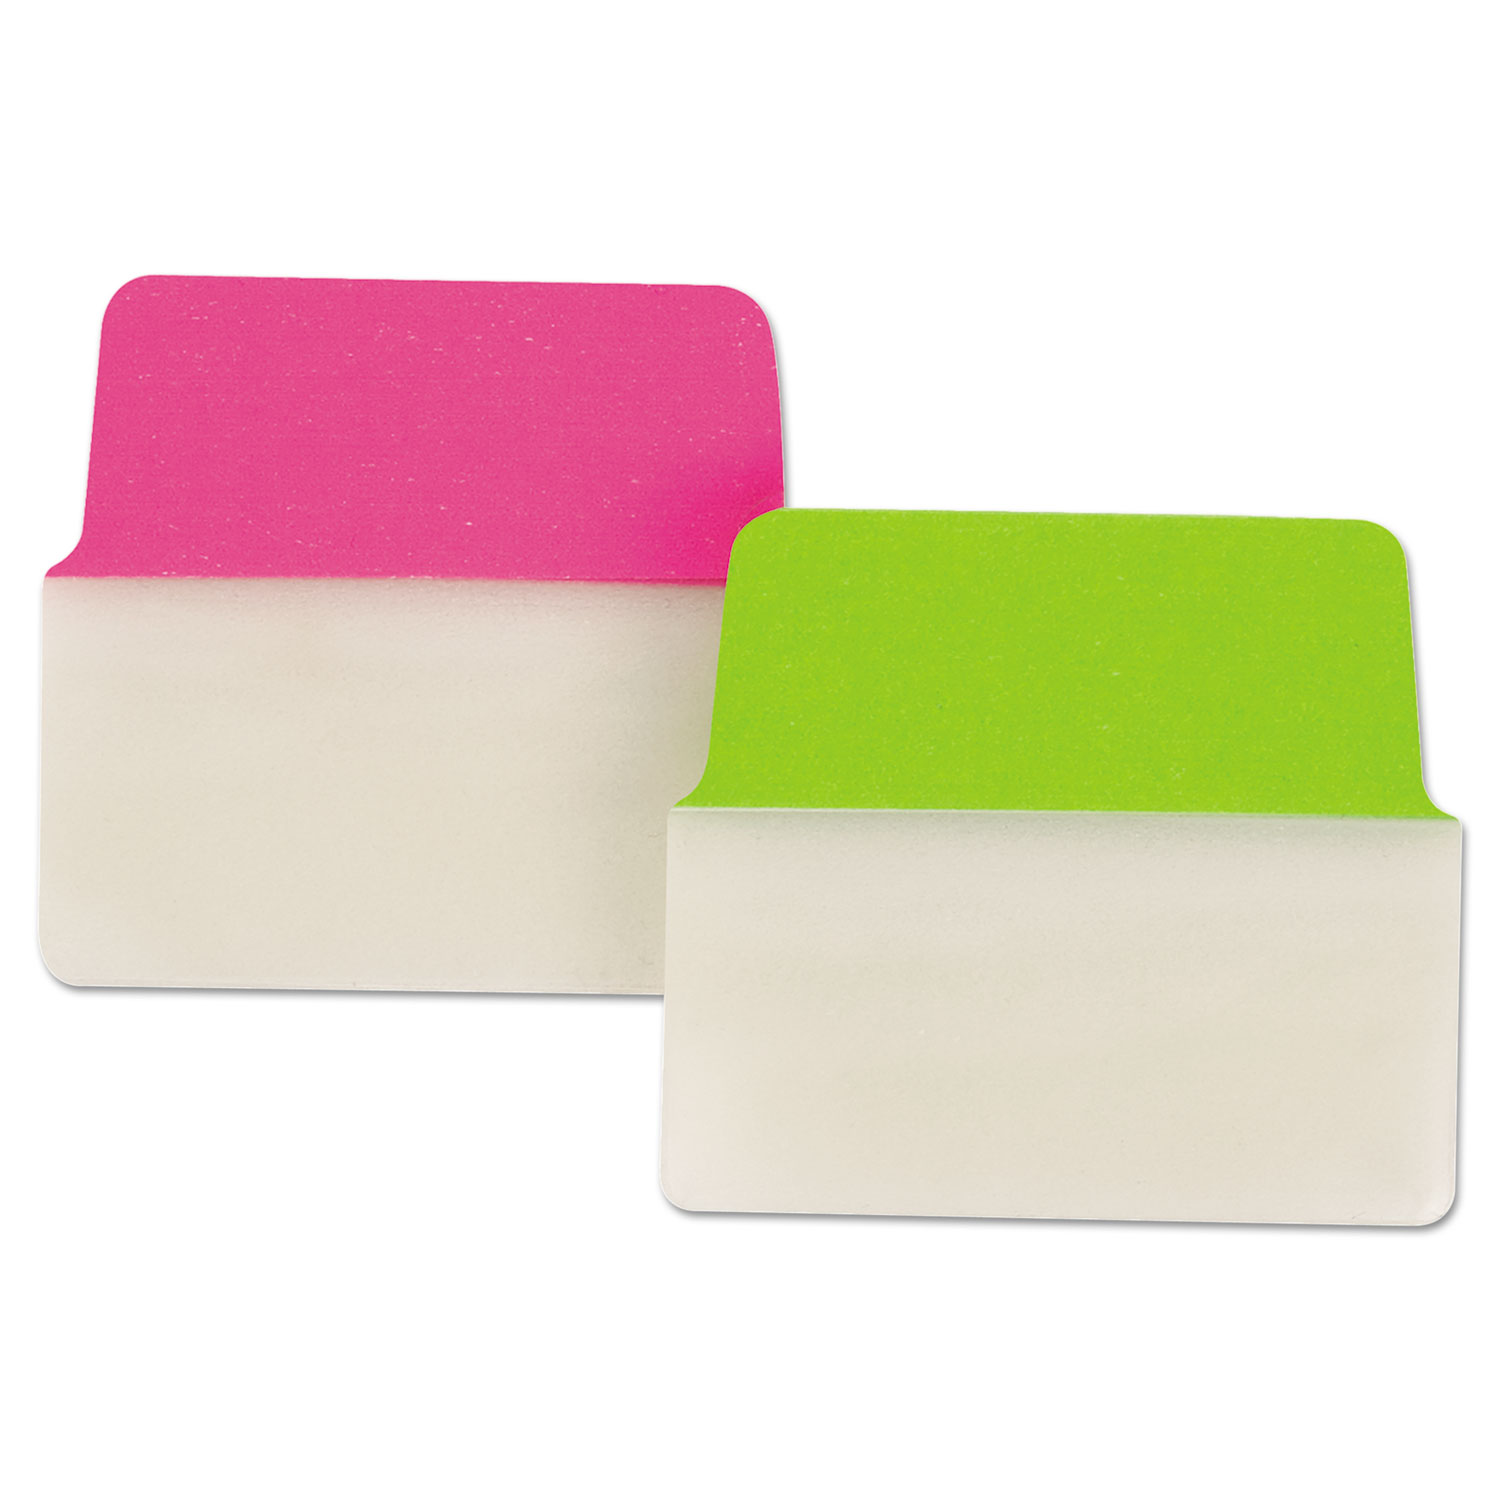 Ultra Tabs Repositionable Tabs, 2 x 1.75, Neon: Green, Pink, 20/PK